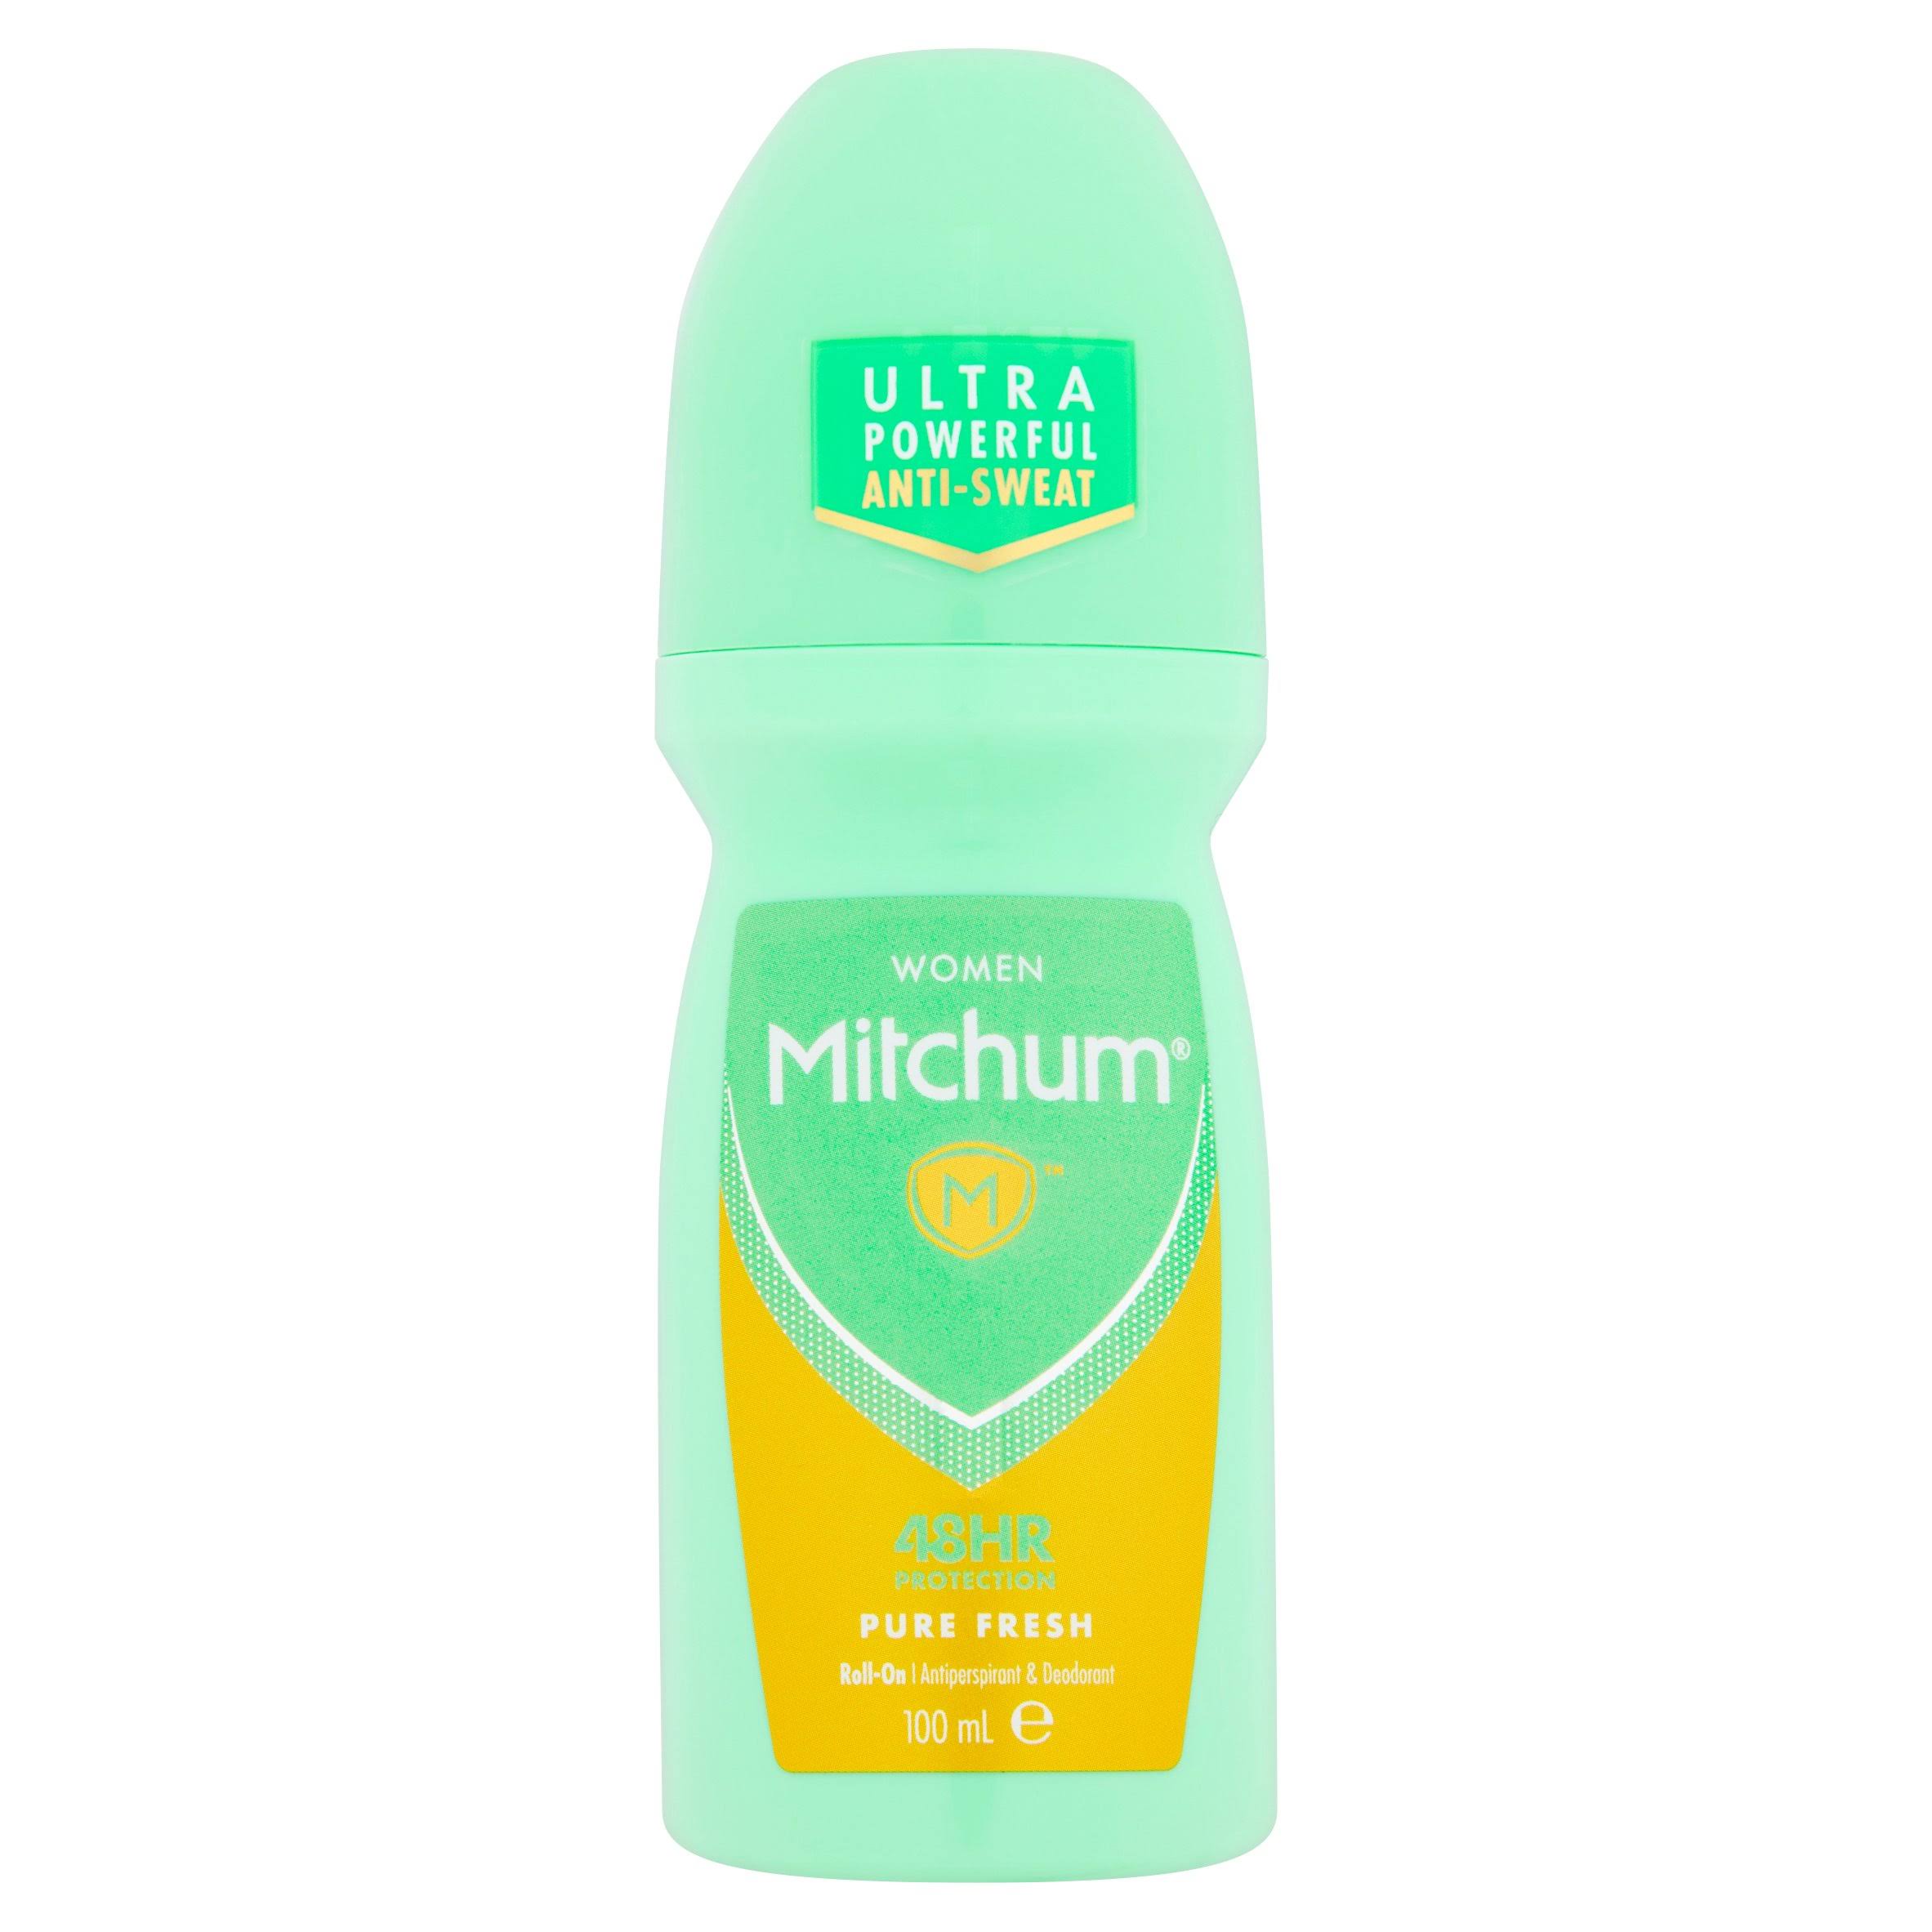 Mitchum Women 48HR Protection Pure Fresh Roll-On Anti-perspirant and Deodorant - 100ml